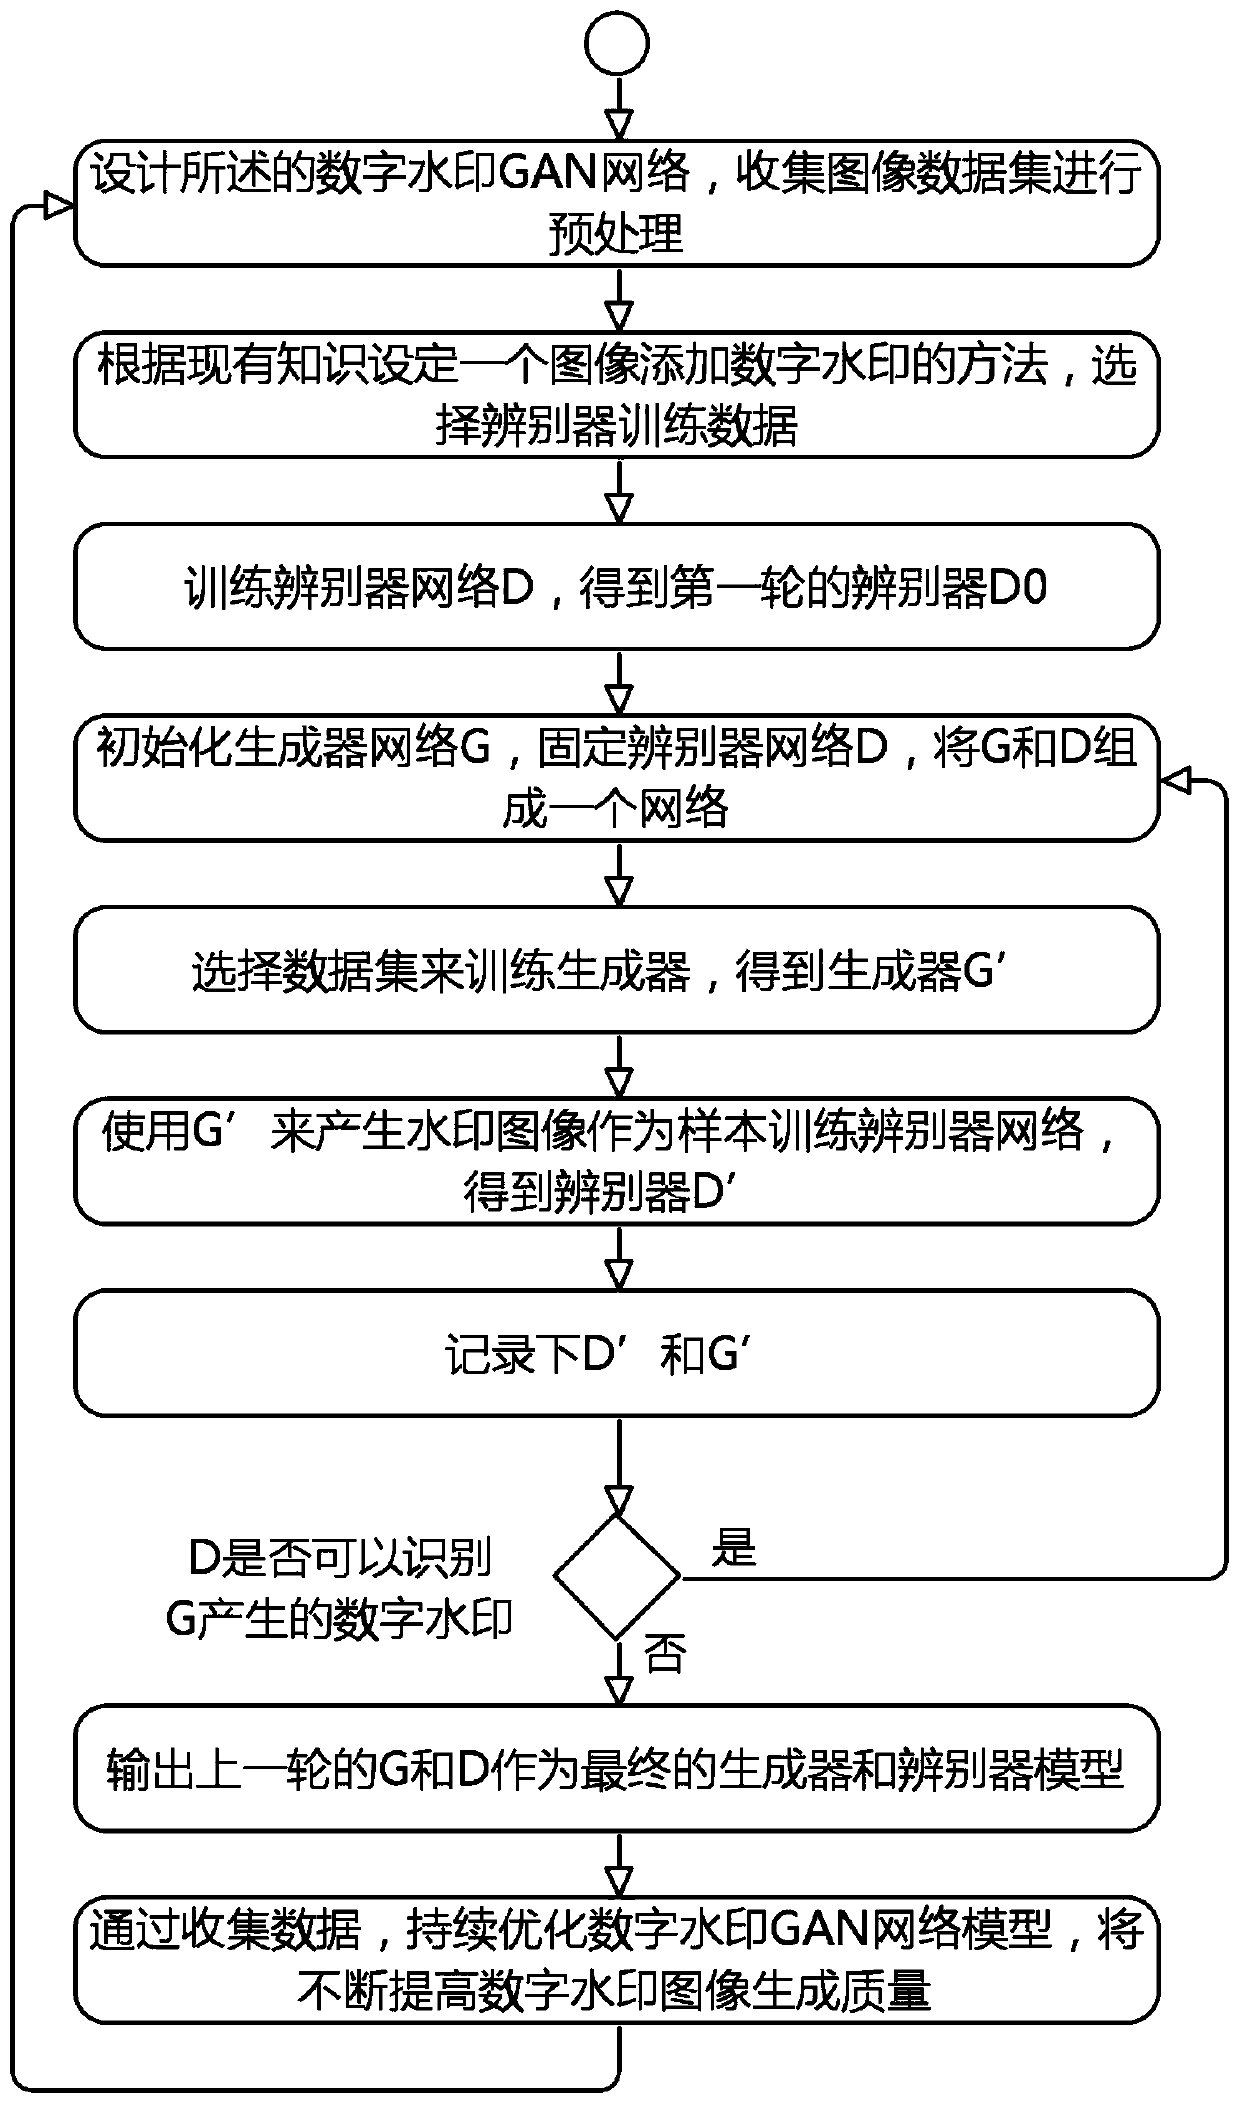 Image digital watermark generation and identification system and method based on GAN network